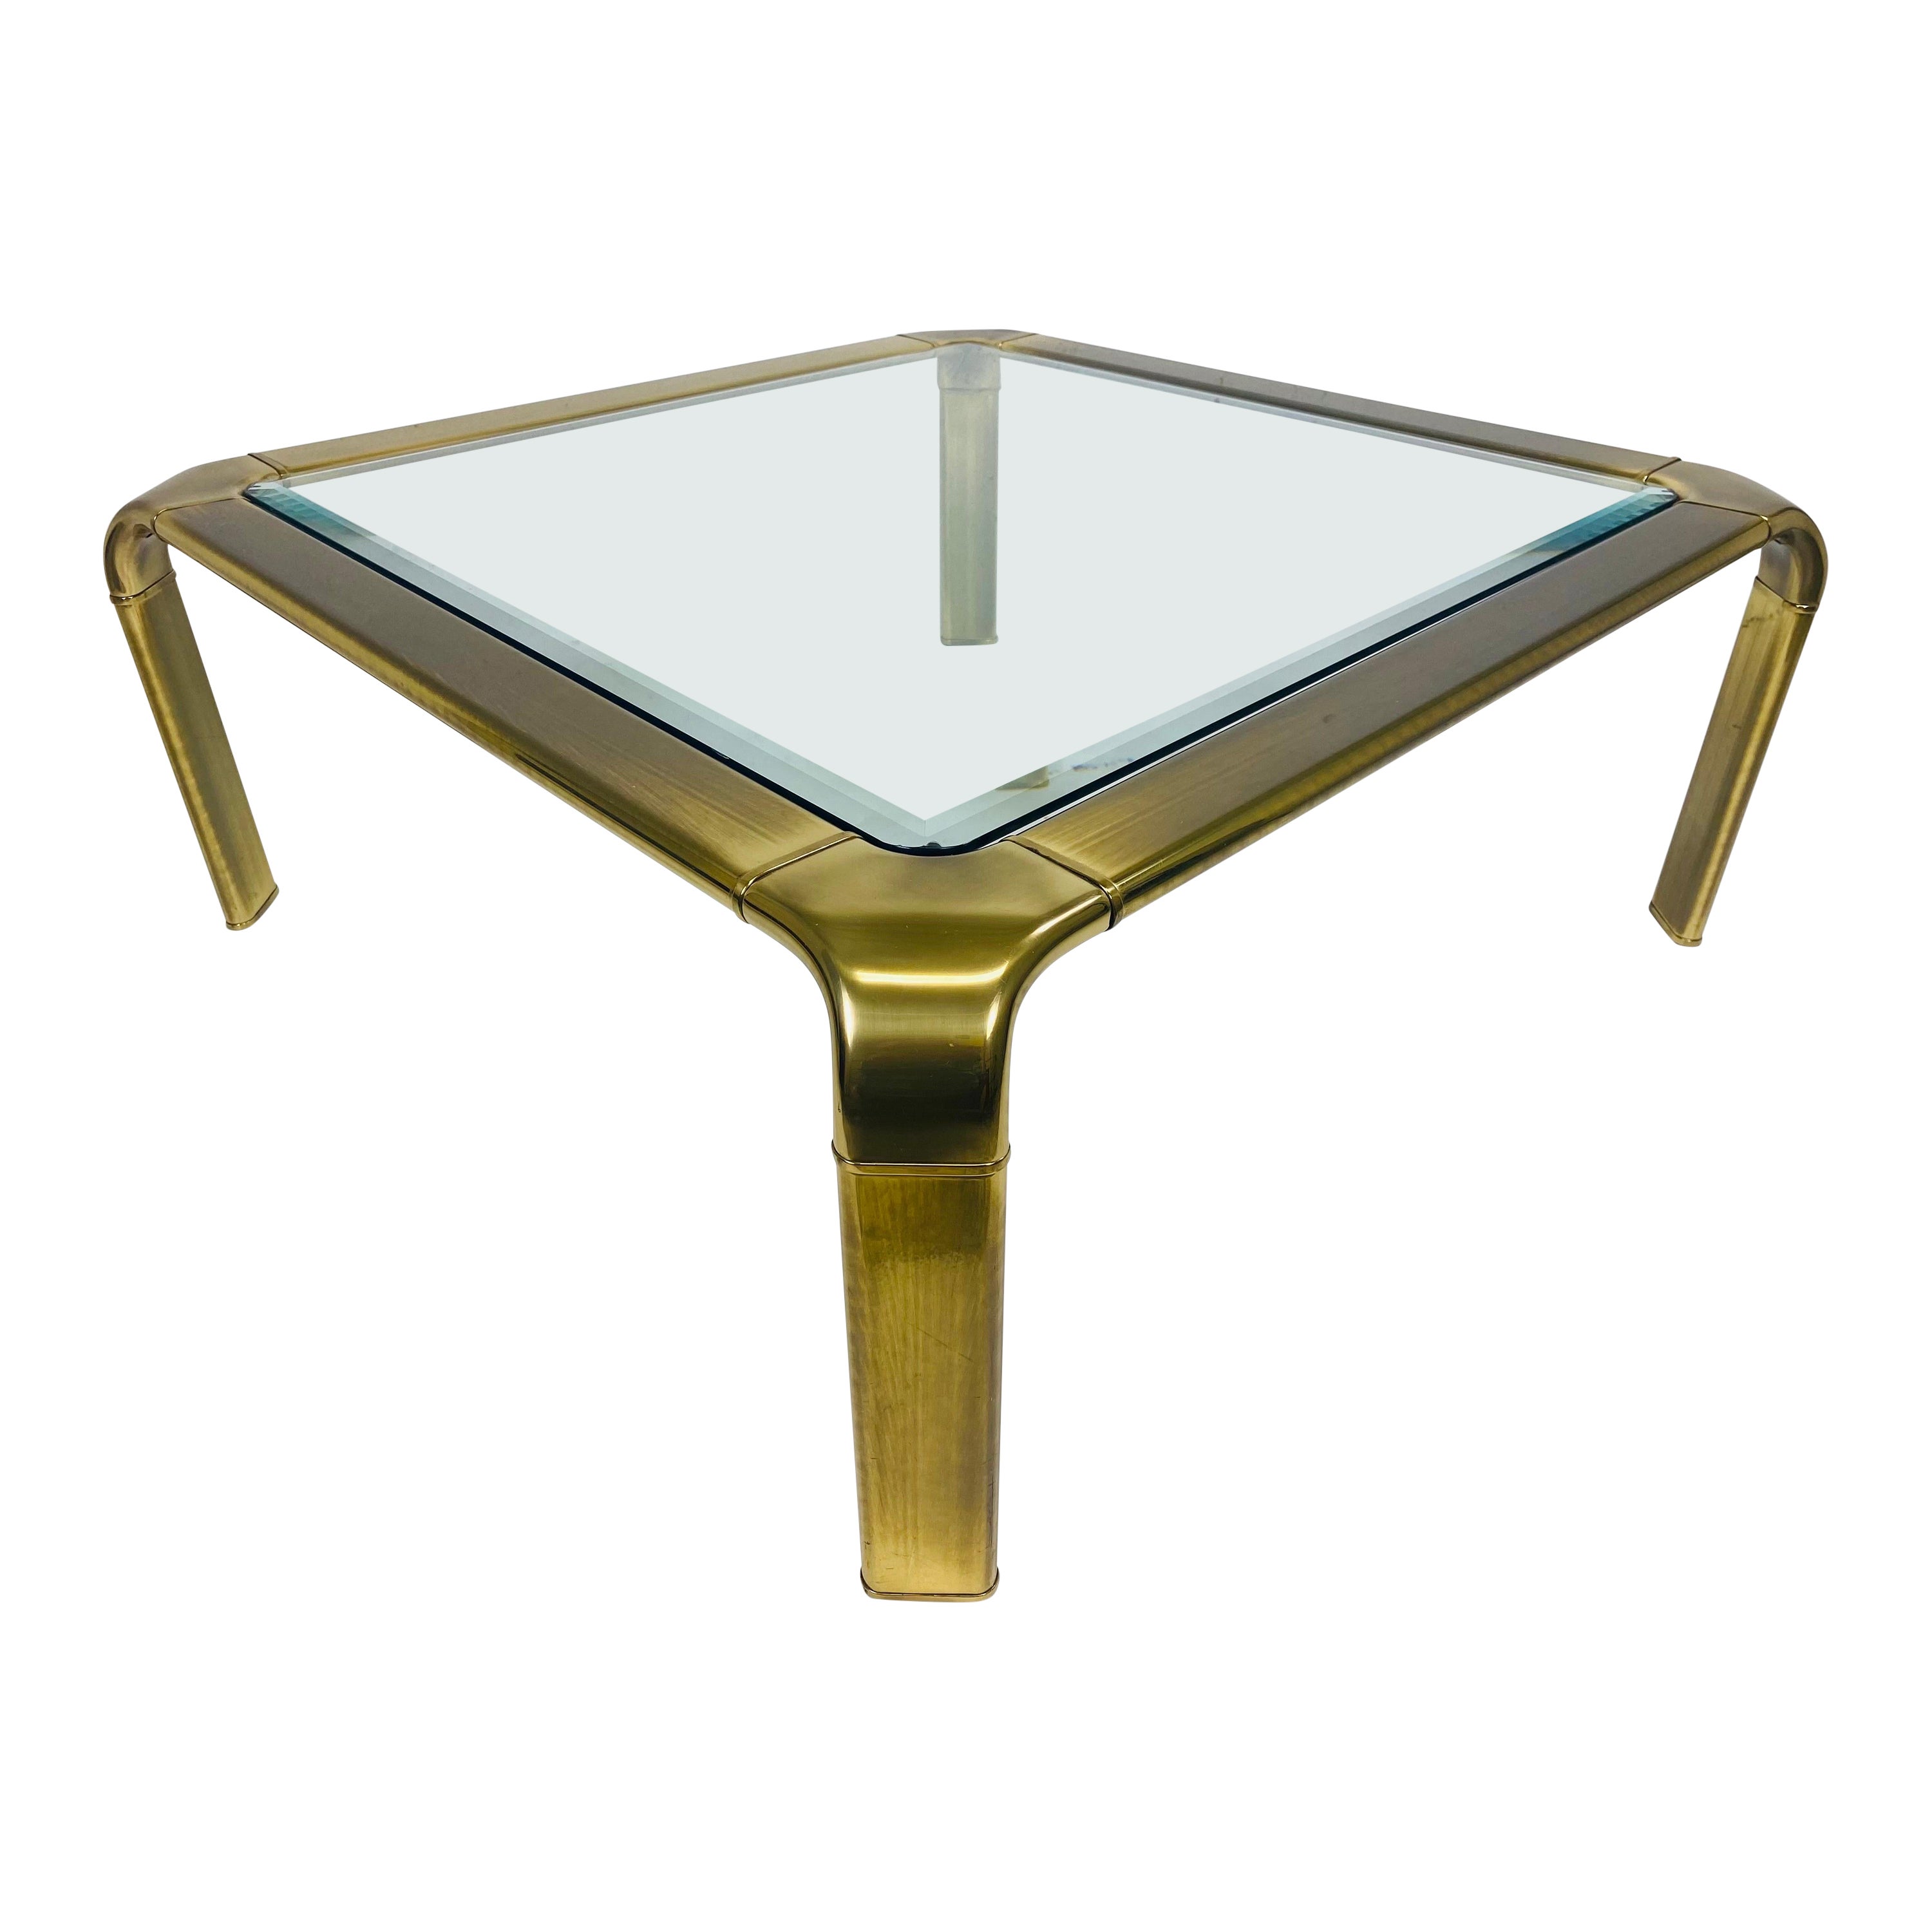 Elegant mid century solid brass cocktail table by Mastercraft For Sale